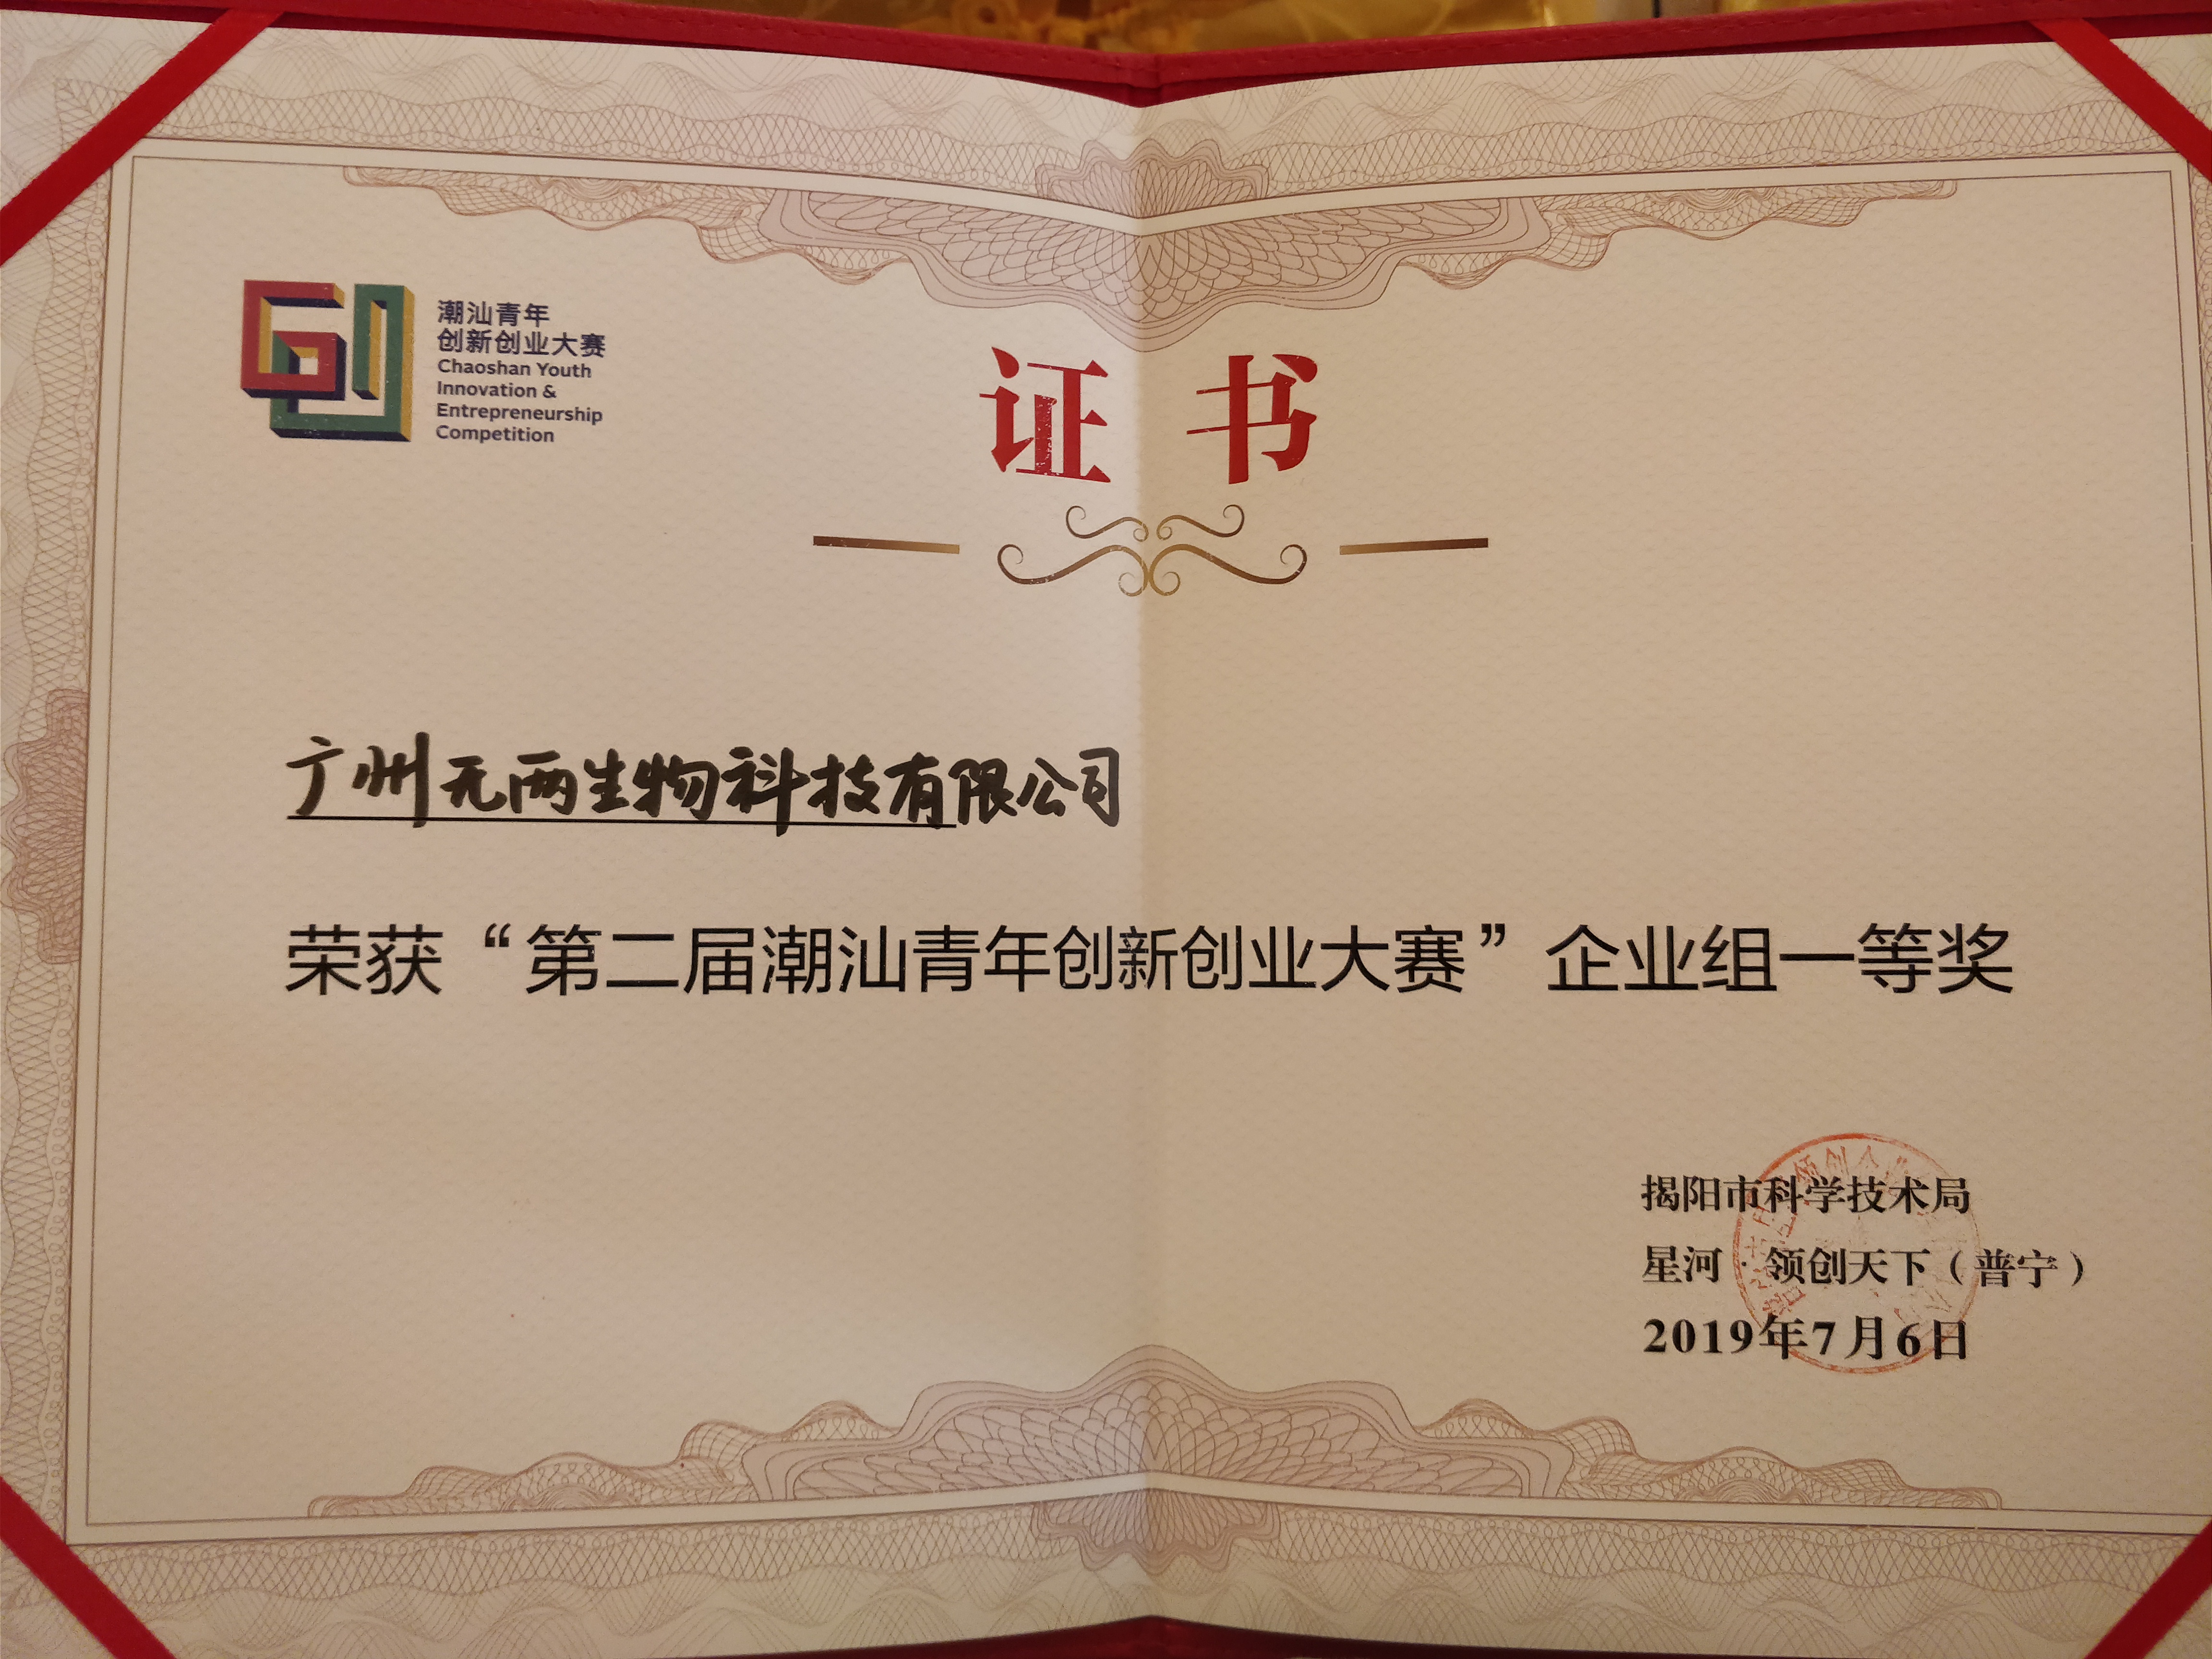 First prize of Chaoshan youth entrepreneurship competition